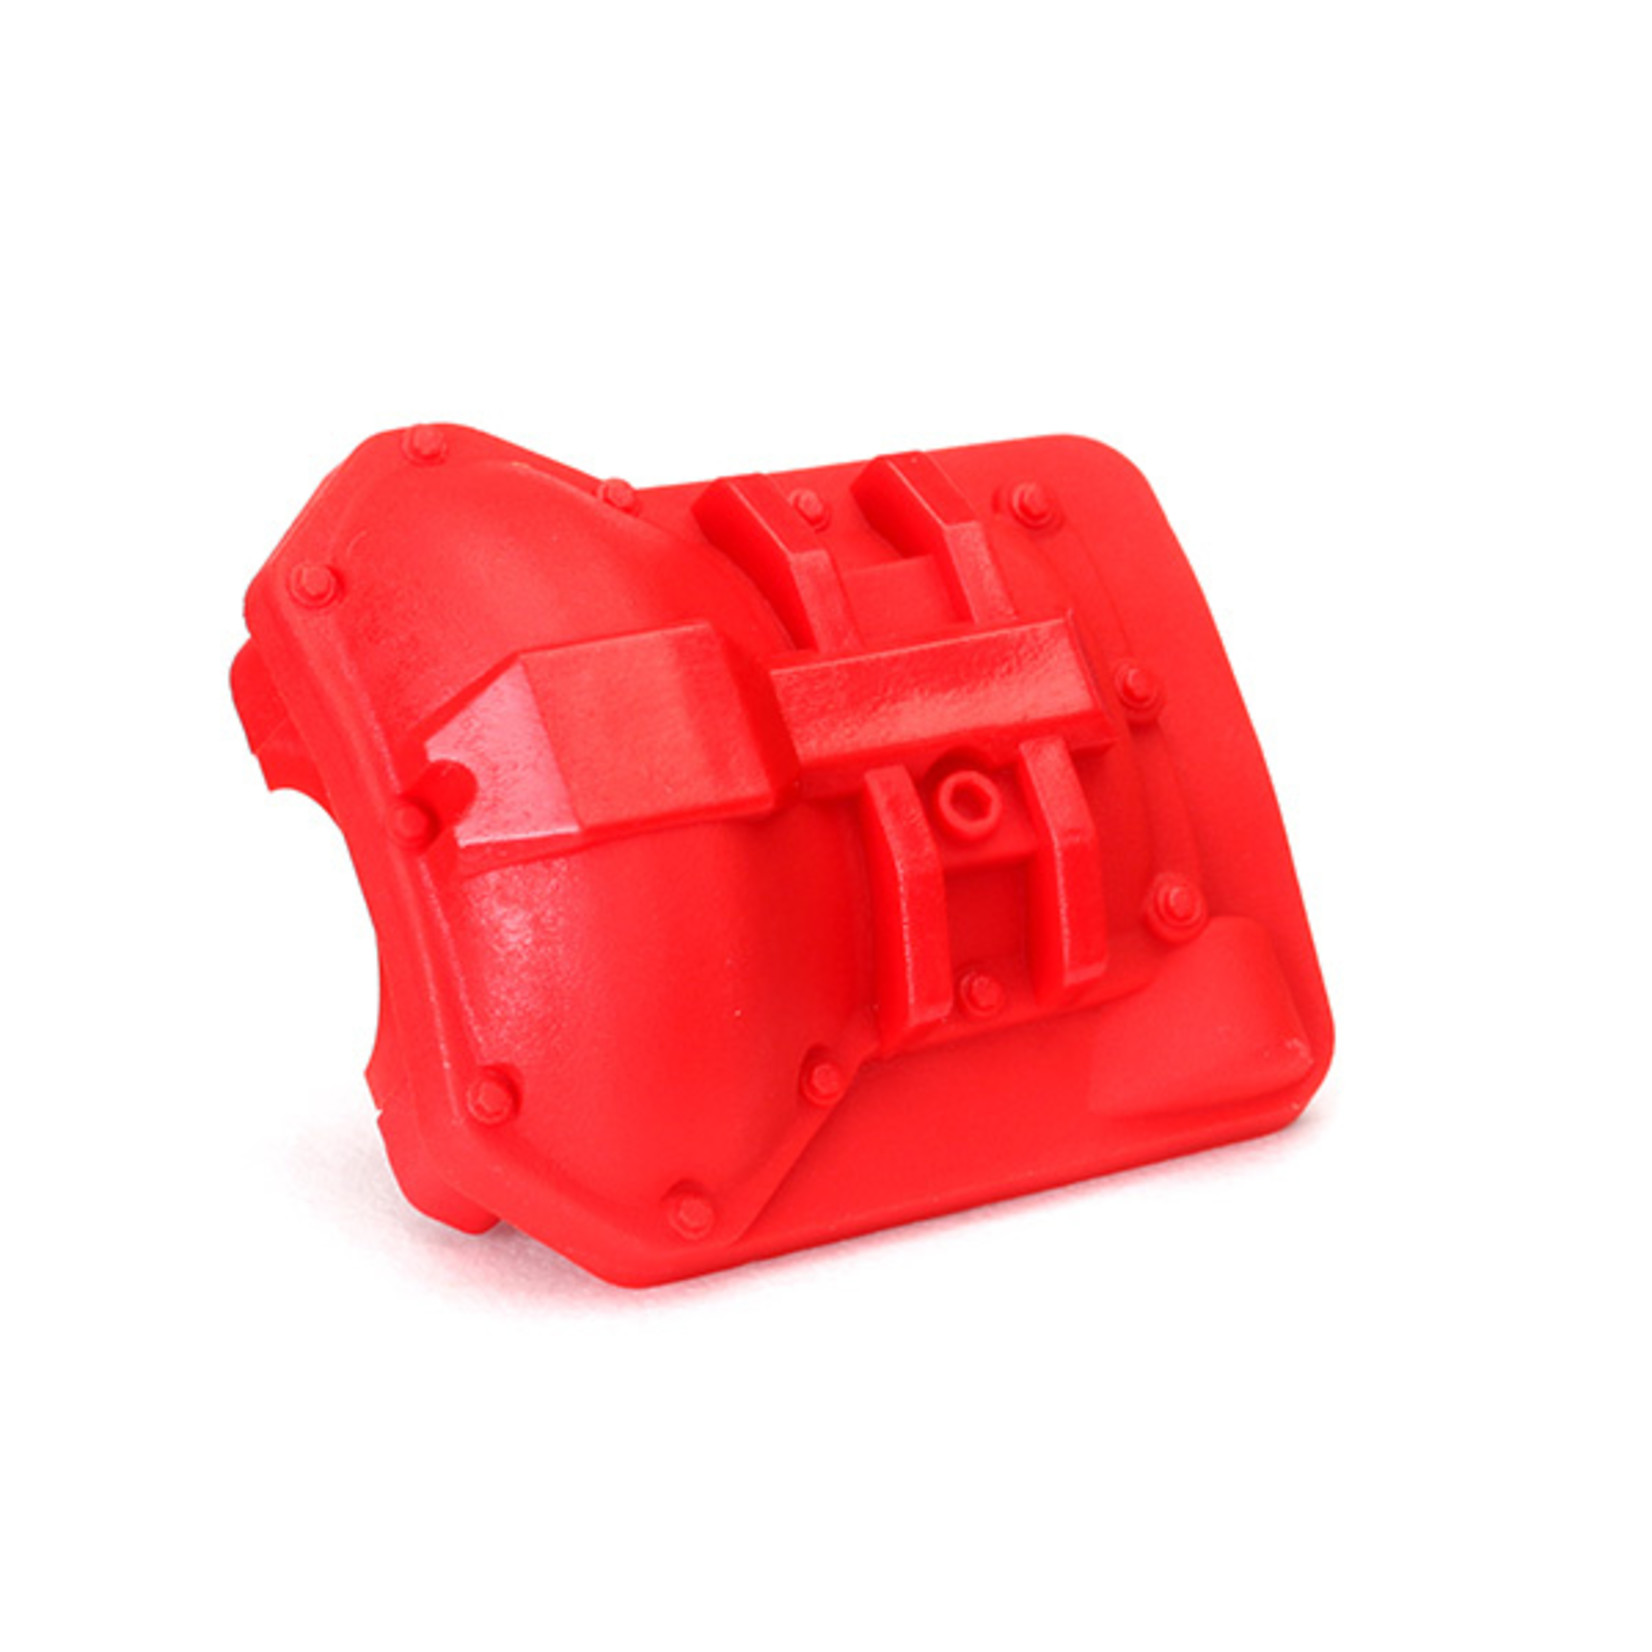 Traxxas 8280R - Differential cover, front or rear (red)